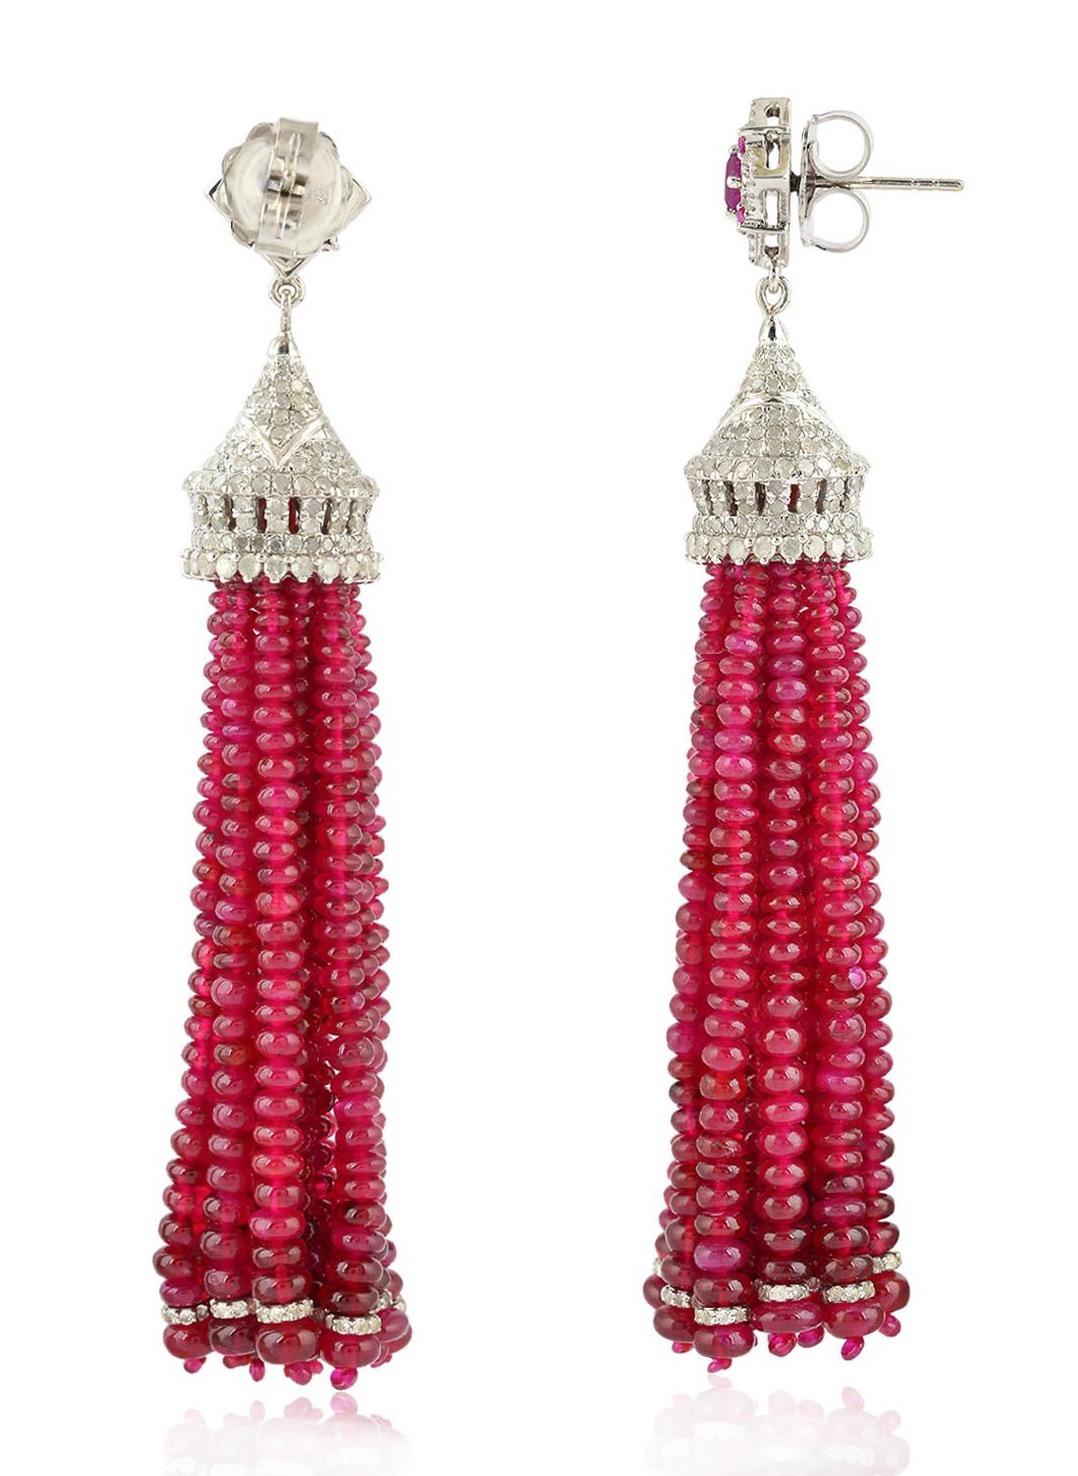 These stunning tassel earrings are handmade in 18-karat gold & sterling silver.  It is set in 163.91 carats ruby, 1.42 carats topaz and 4.07 carats of glittering diamonds. 

FOLLOW  MEGHNA JEWELS storefront to view the latest collection & exclusive